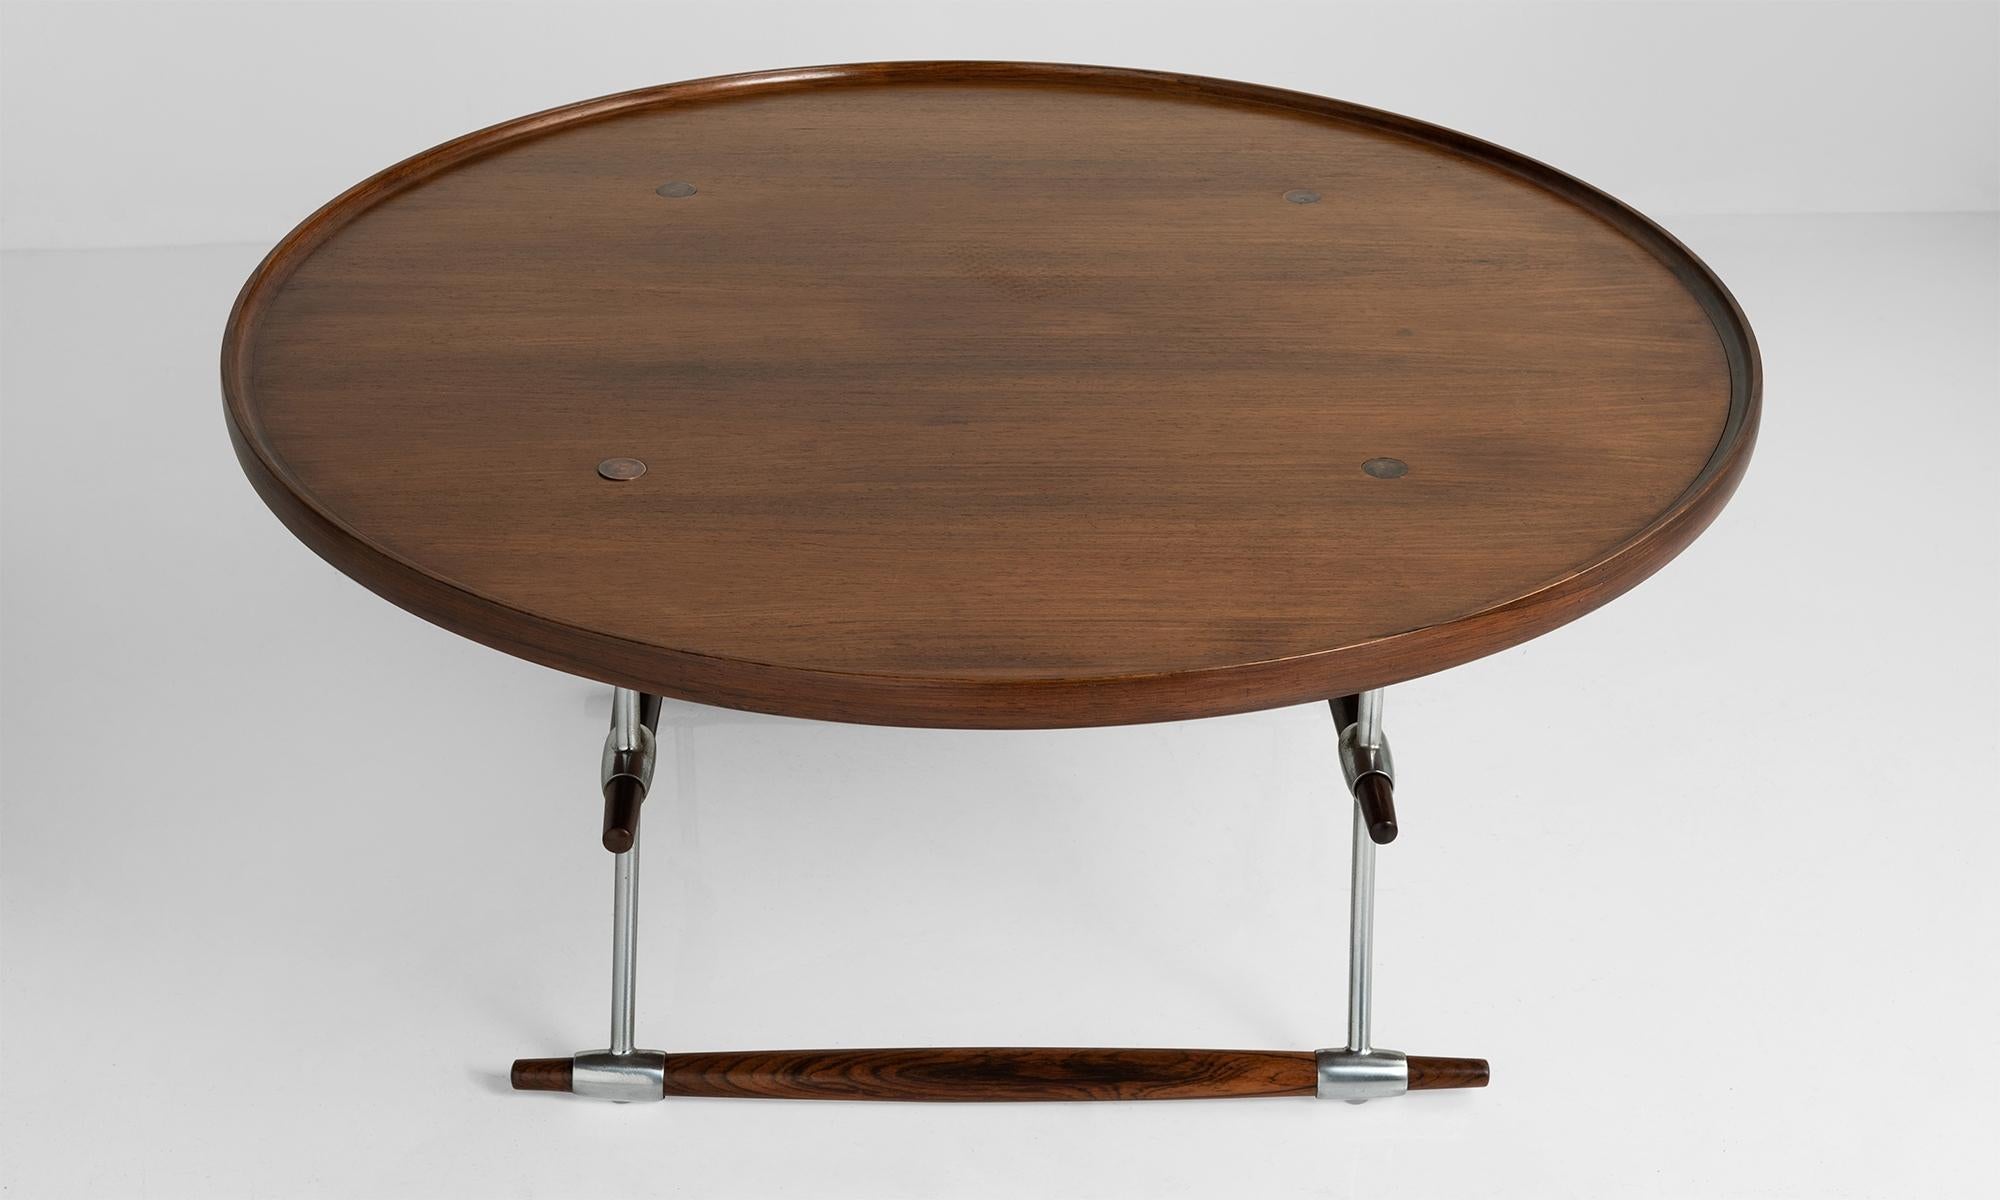 Circular wood and chromed steel table manufactured by Richard Nissen.